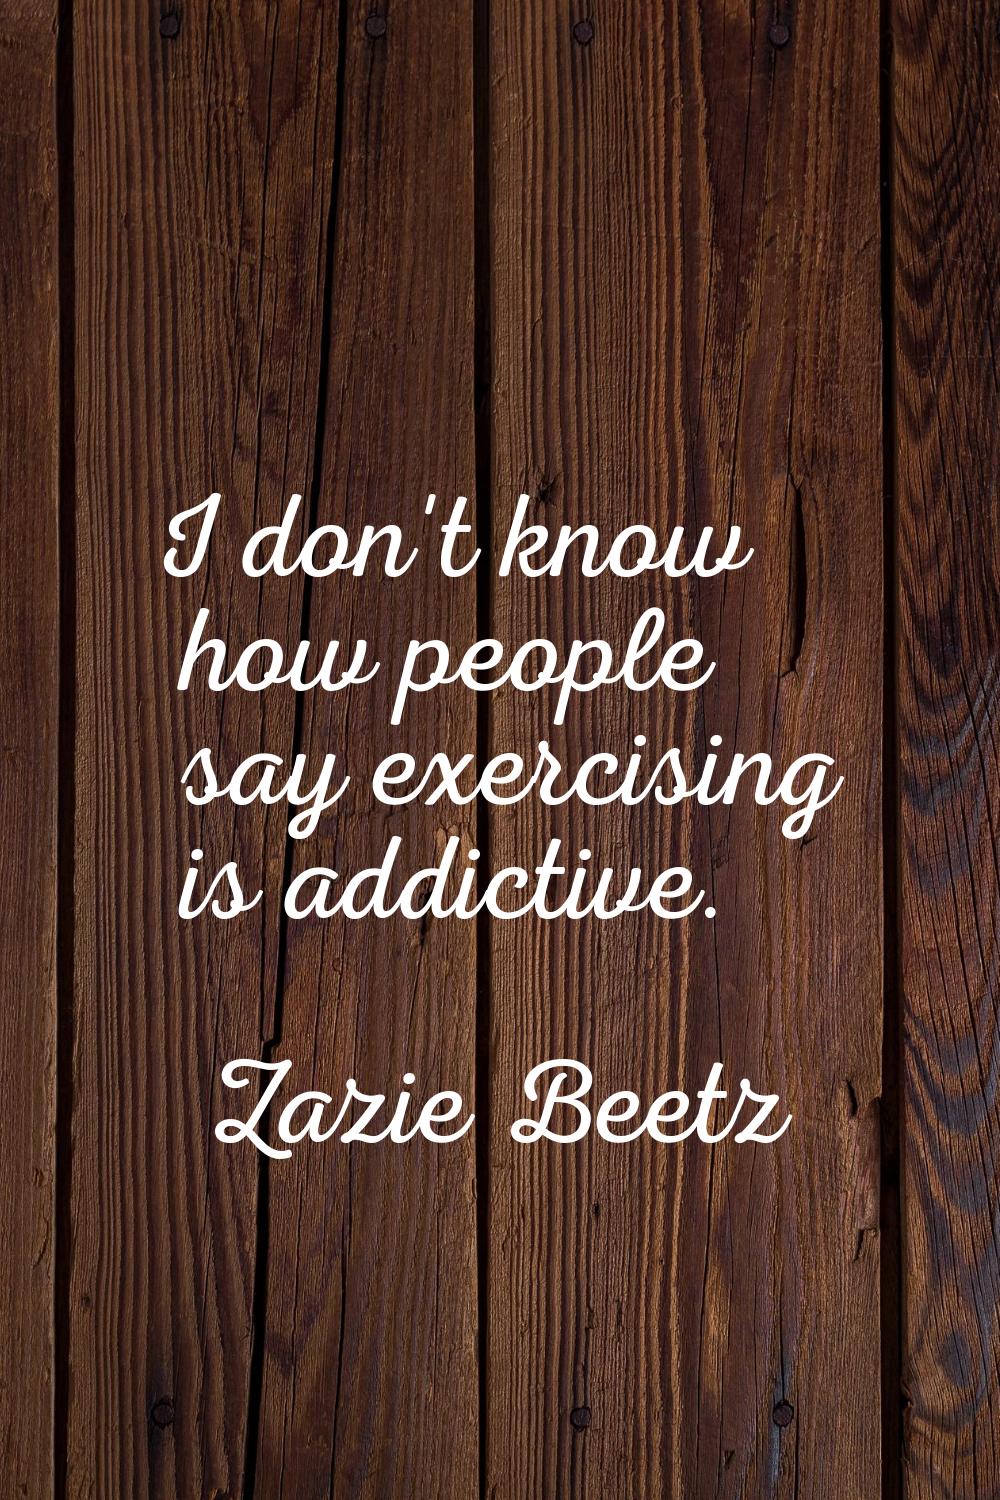 I don't know how people say exercising is addictive.